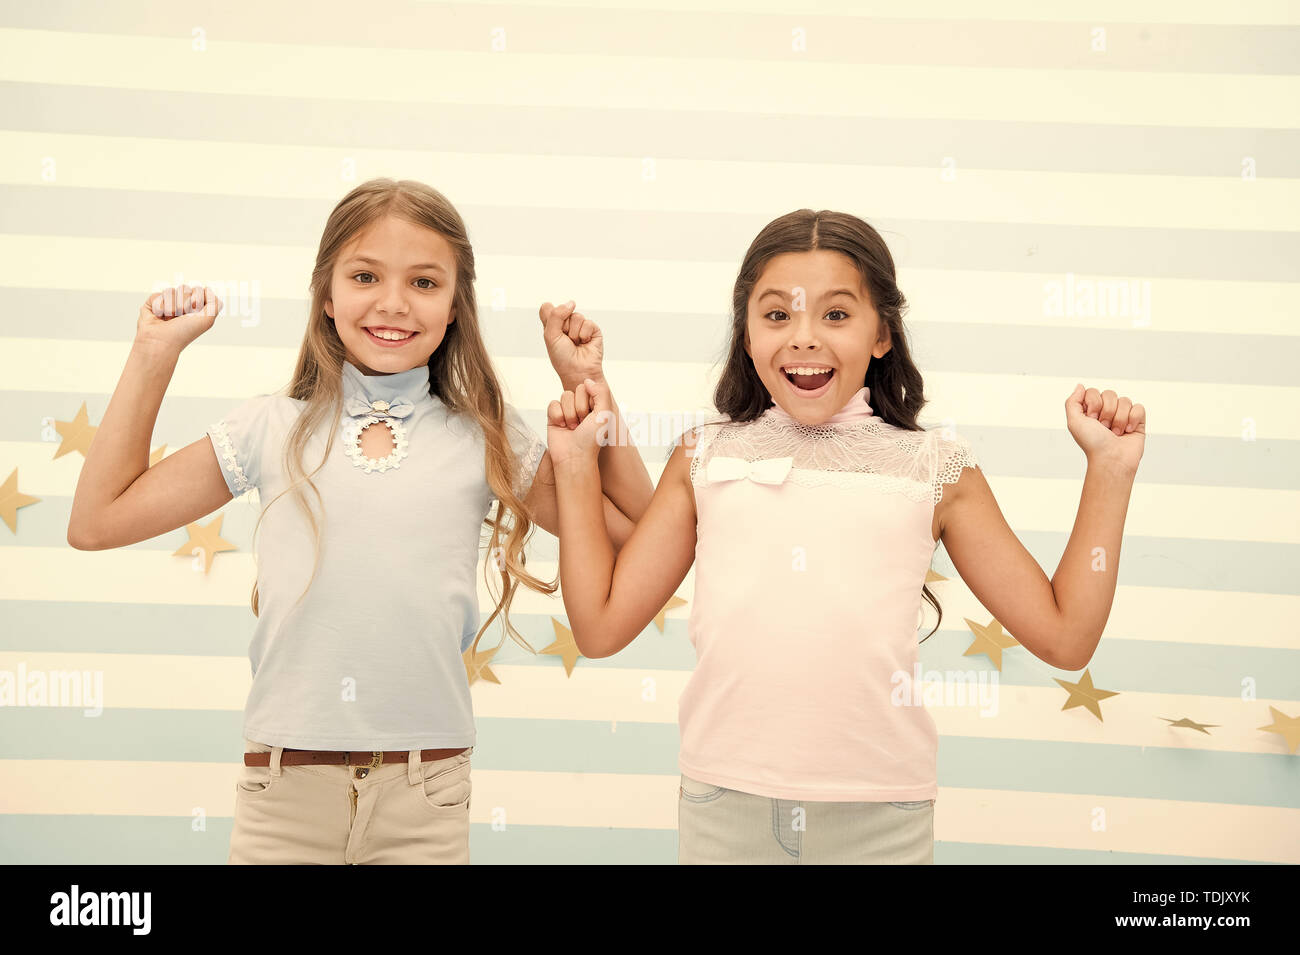 Thrilled moments together. Kids schoolgirls preteens happy together. Girls smiling happy faces excited expression stand striped background. Girls children best friends thrilled about surprising news. Stock Photo